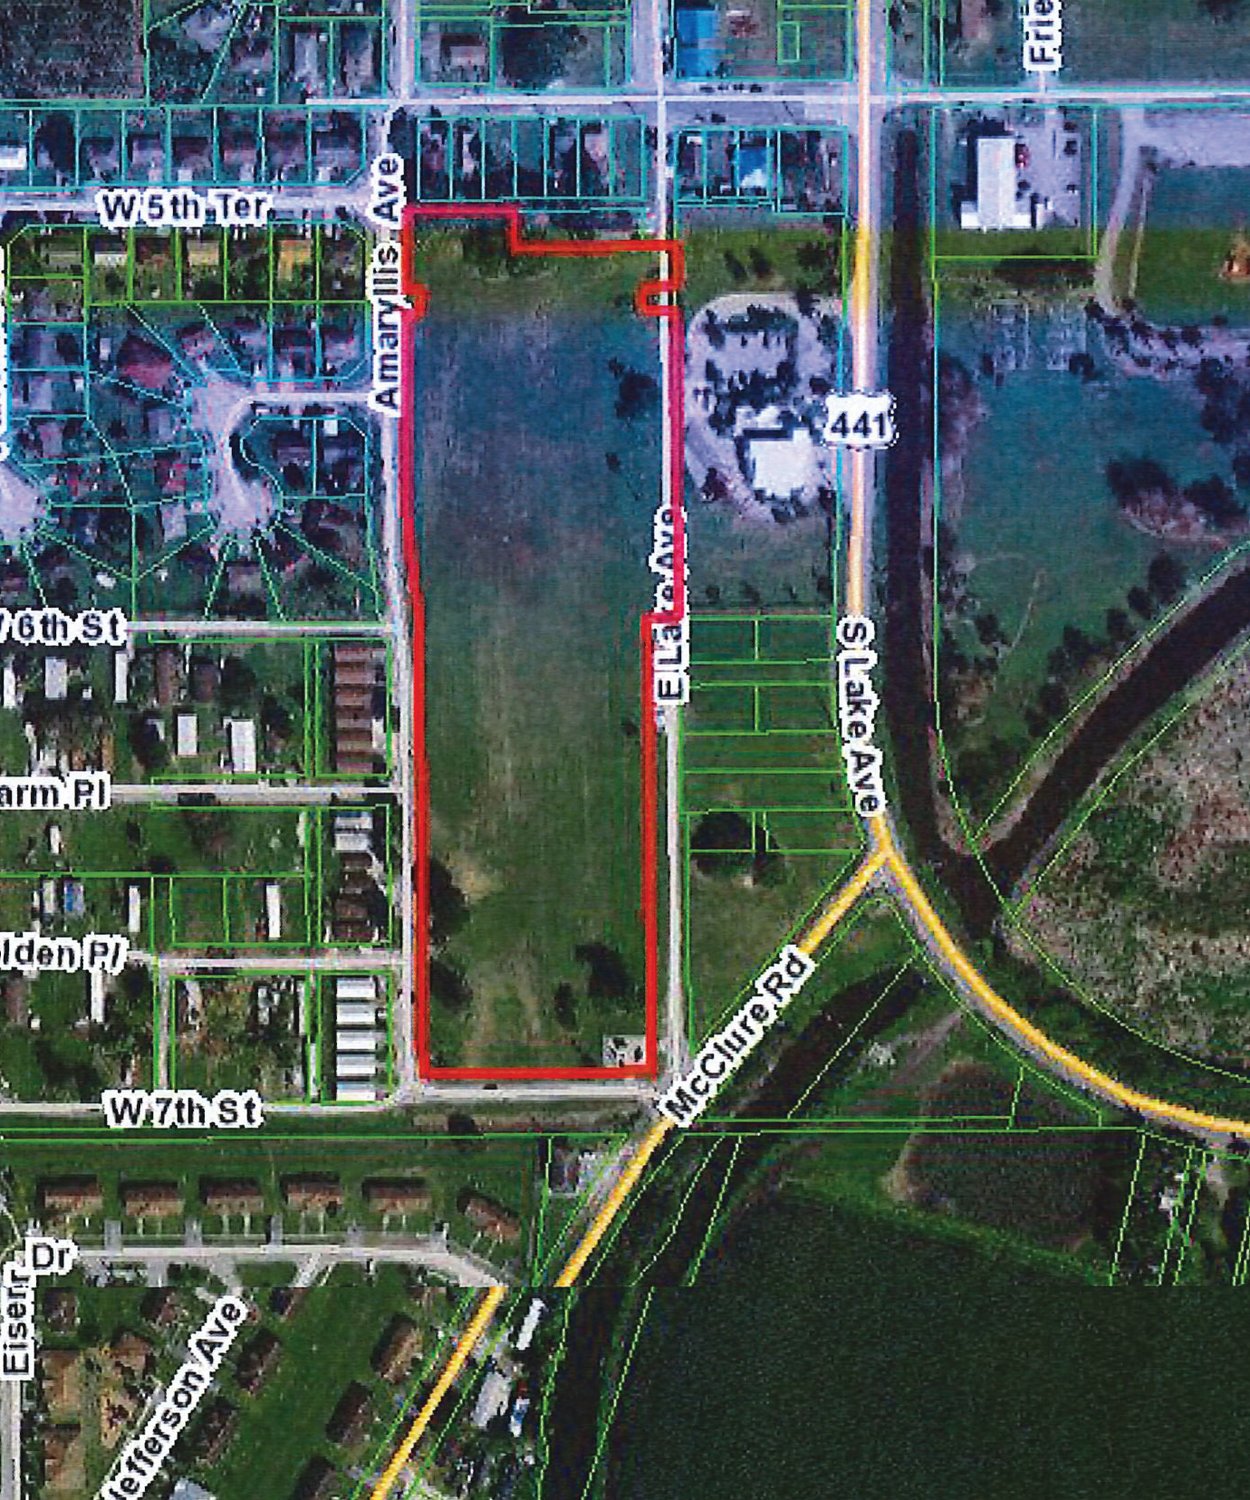 This map shows the location of the 141-unit, three-story apartment complex planned on a 7.8 acre propertyin the City of Pahokee.